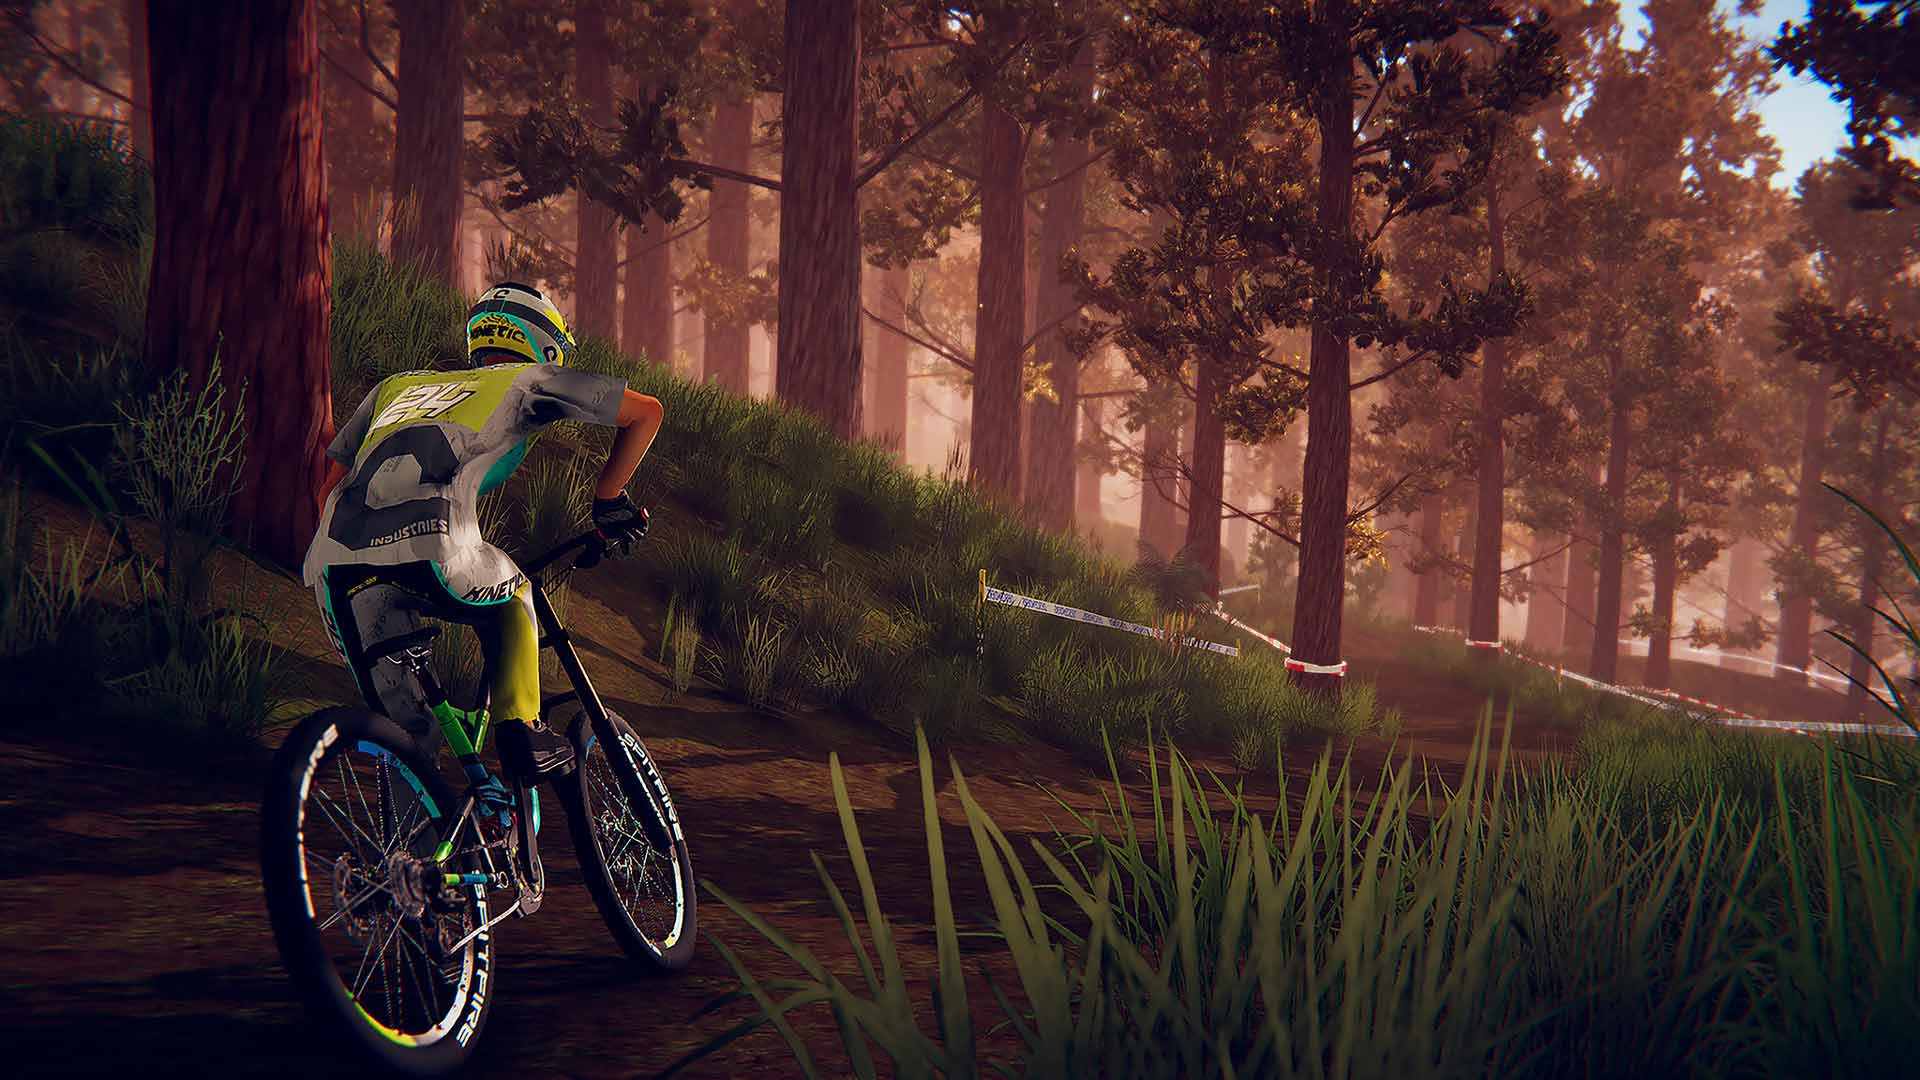 Descenders brings downhill mountain biking to PS4 next month - Freaks 365